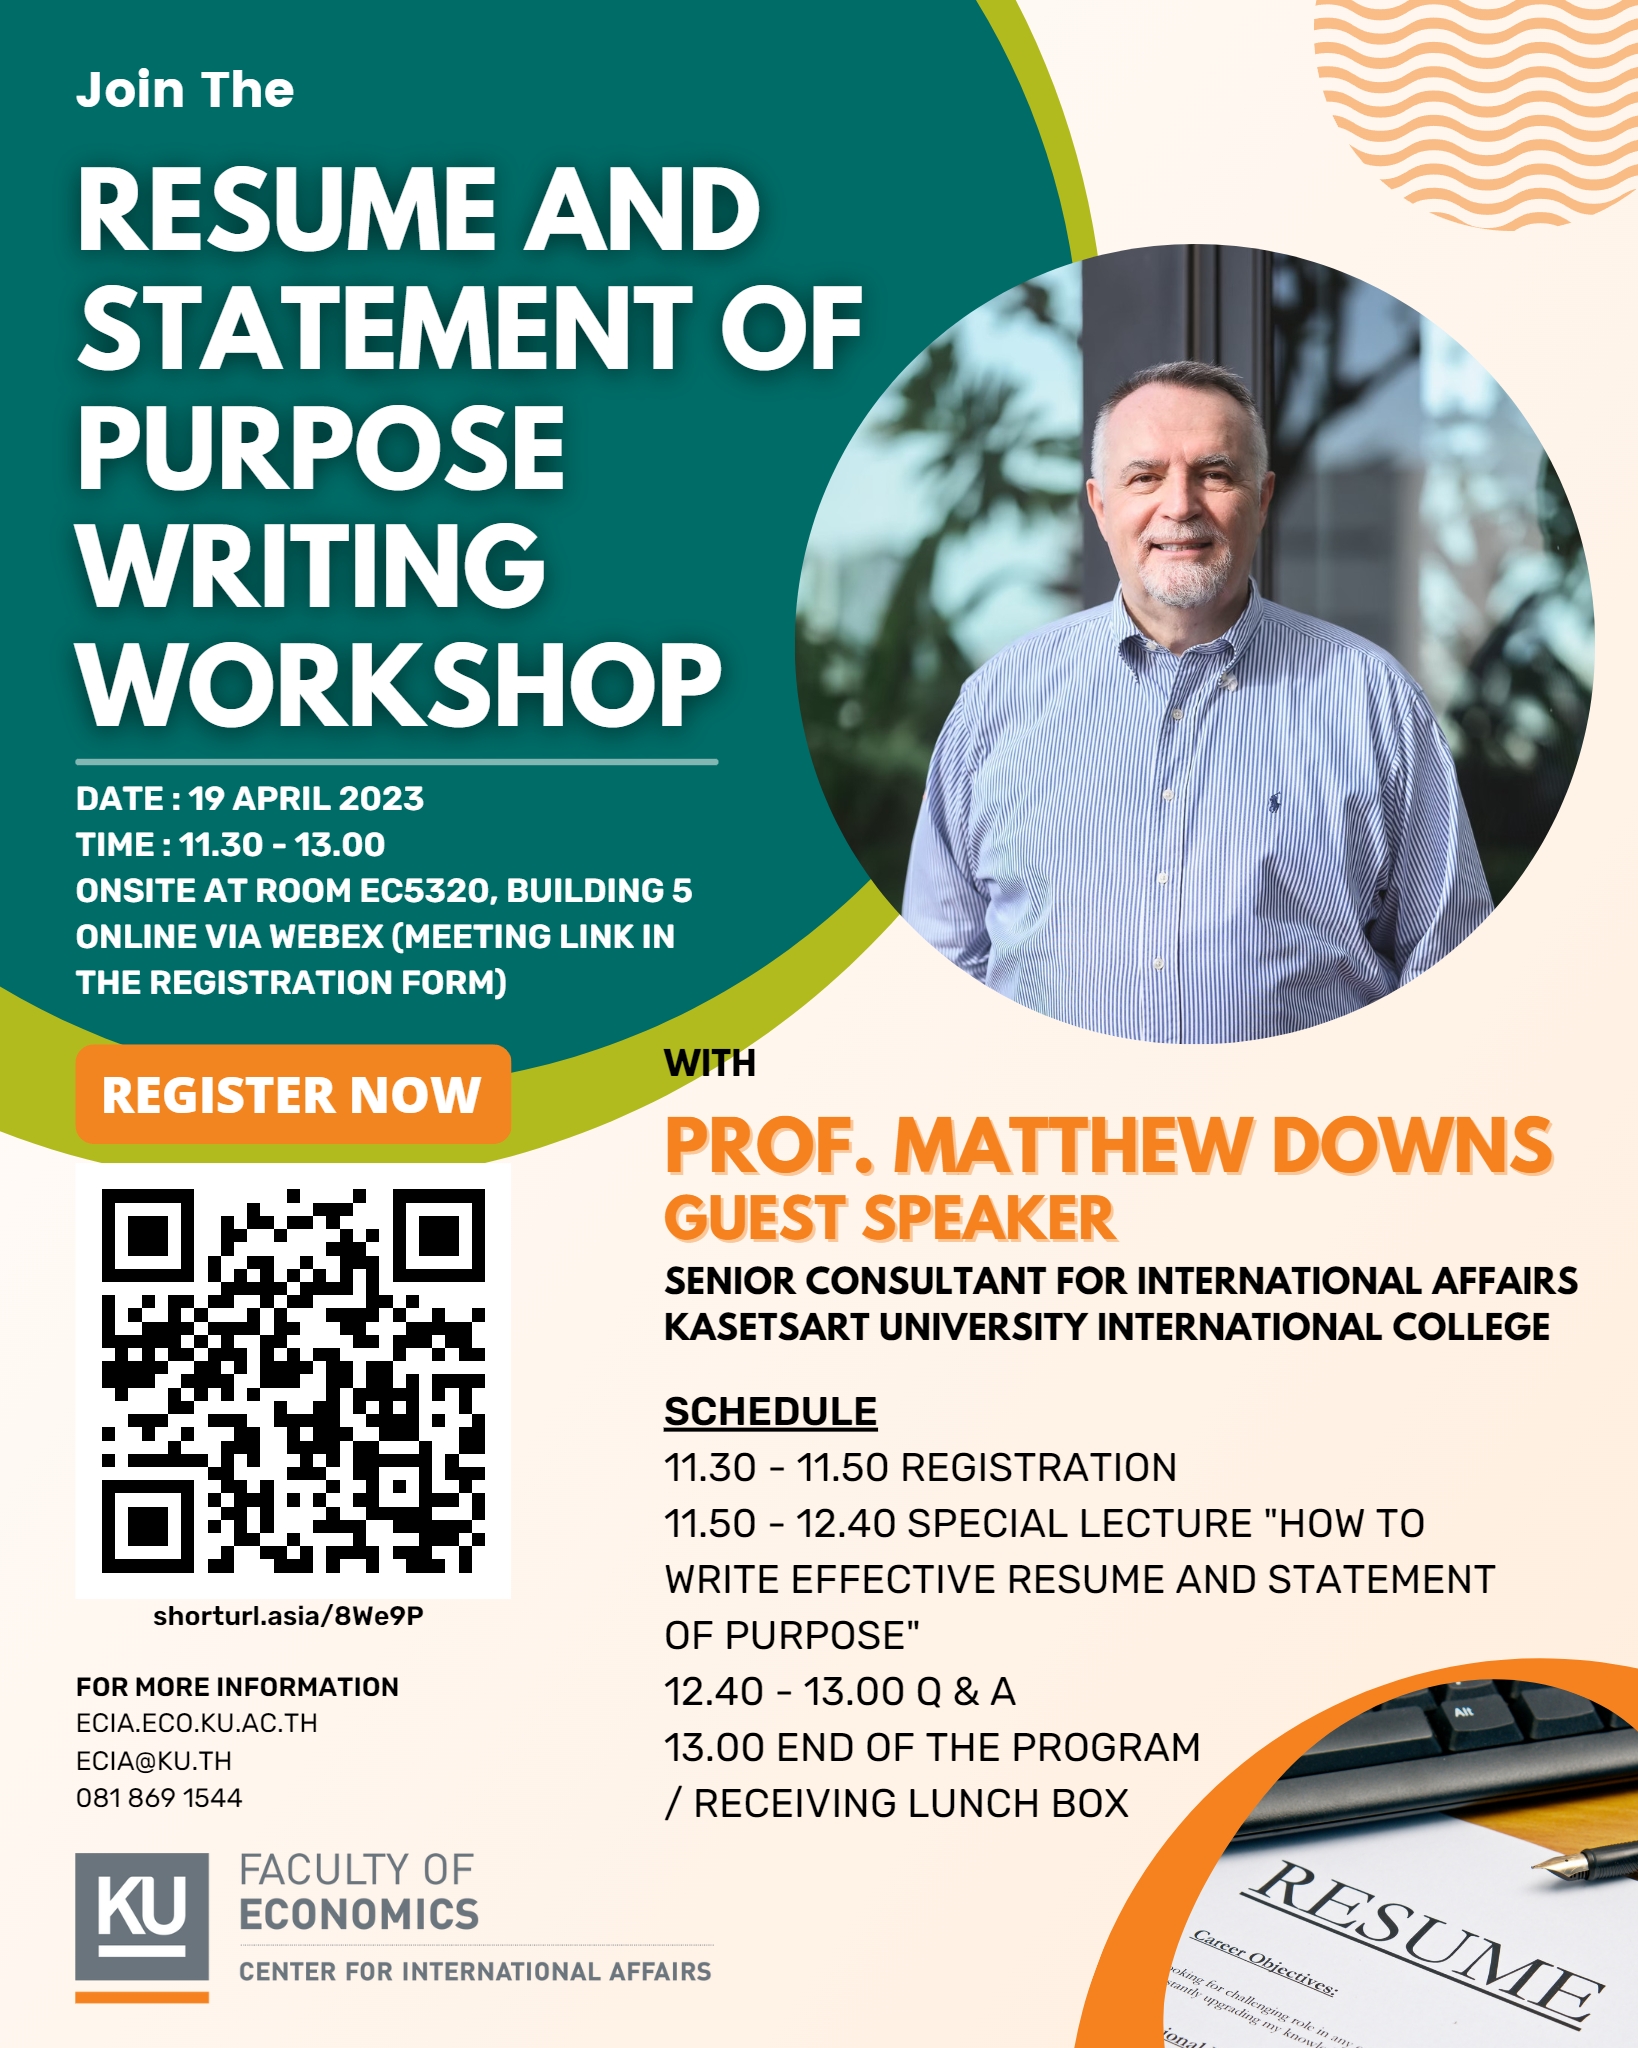 “Resume and Statement of Purpose Writing Workshop” on April 19th, 2023